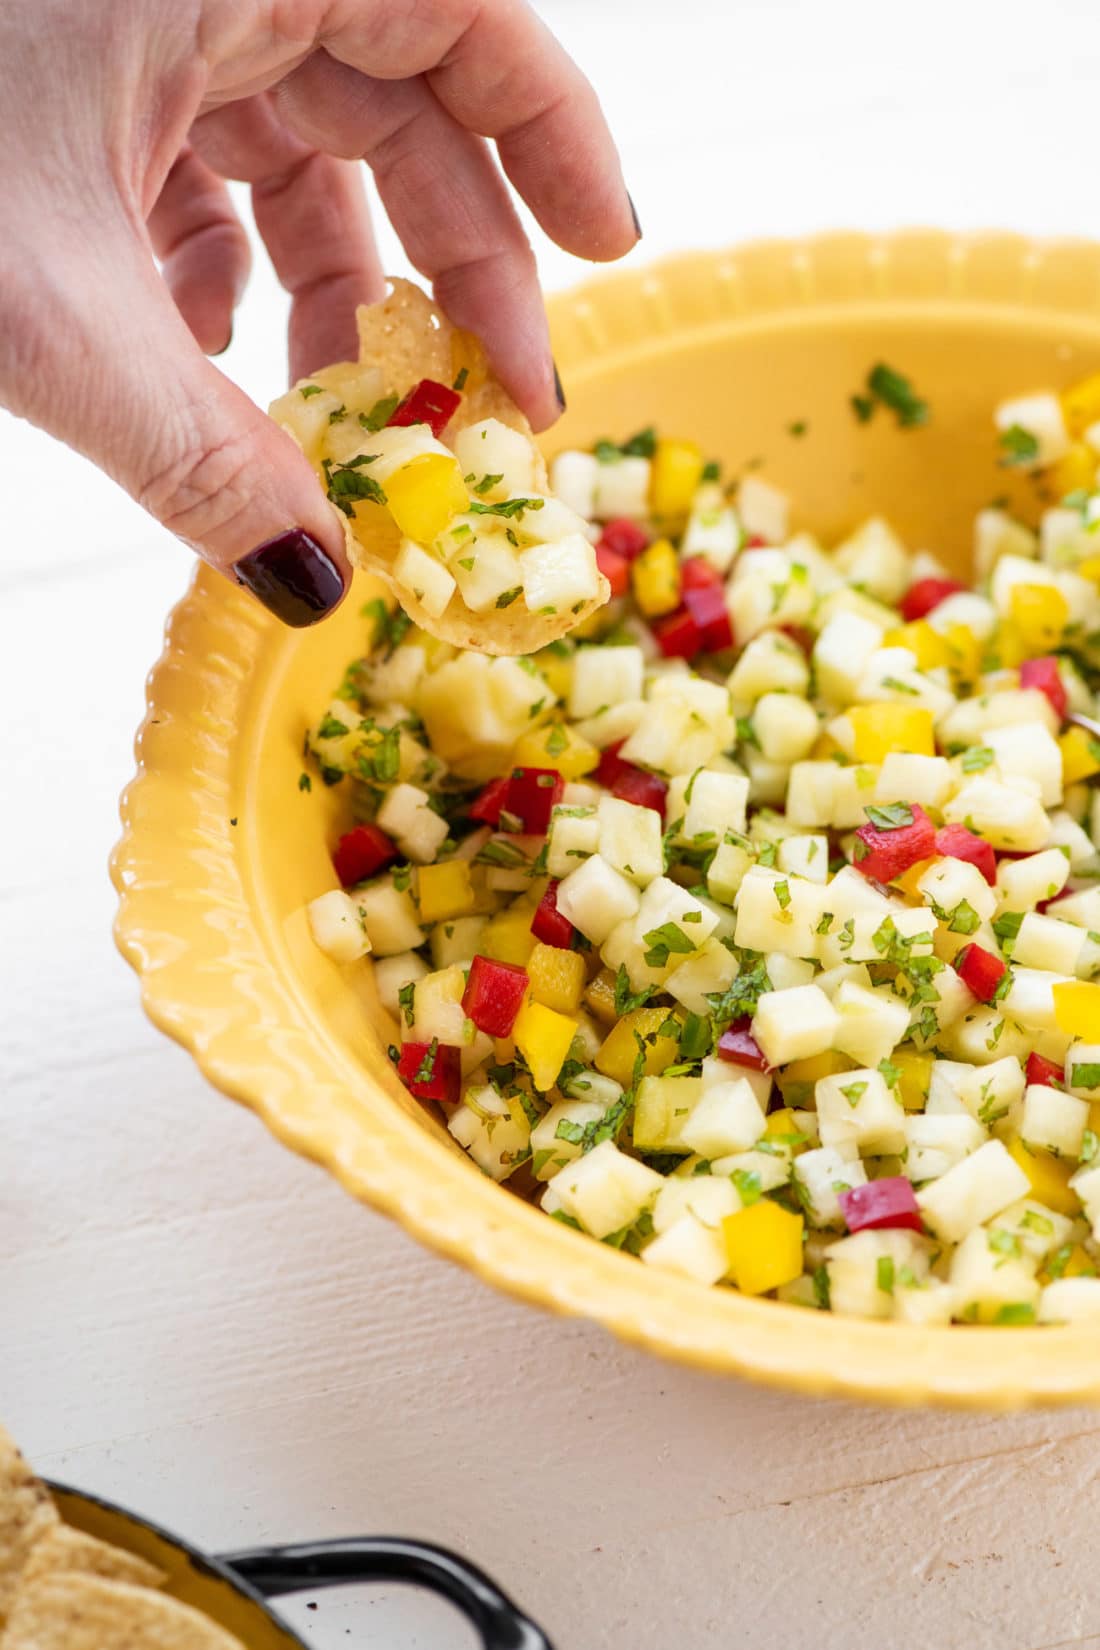 Woman scooping a chip into a bowl of Pineapple Mint Jalapeno Salsa.